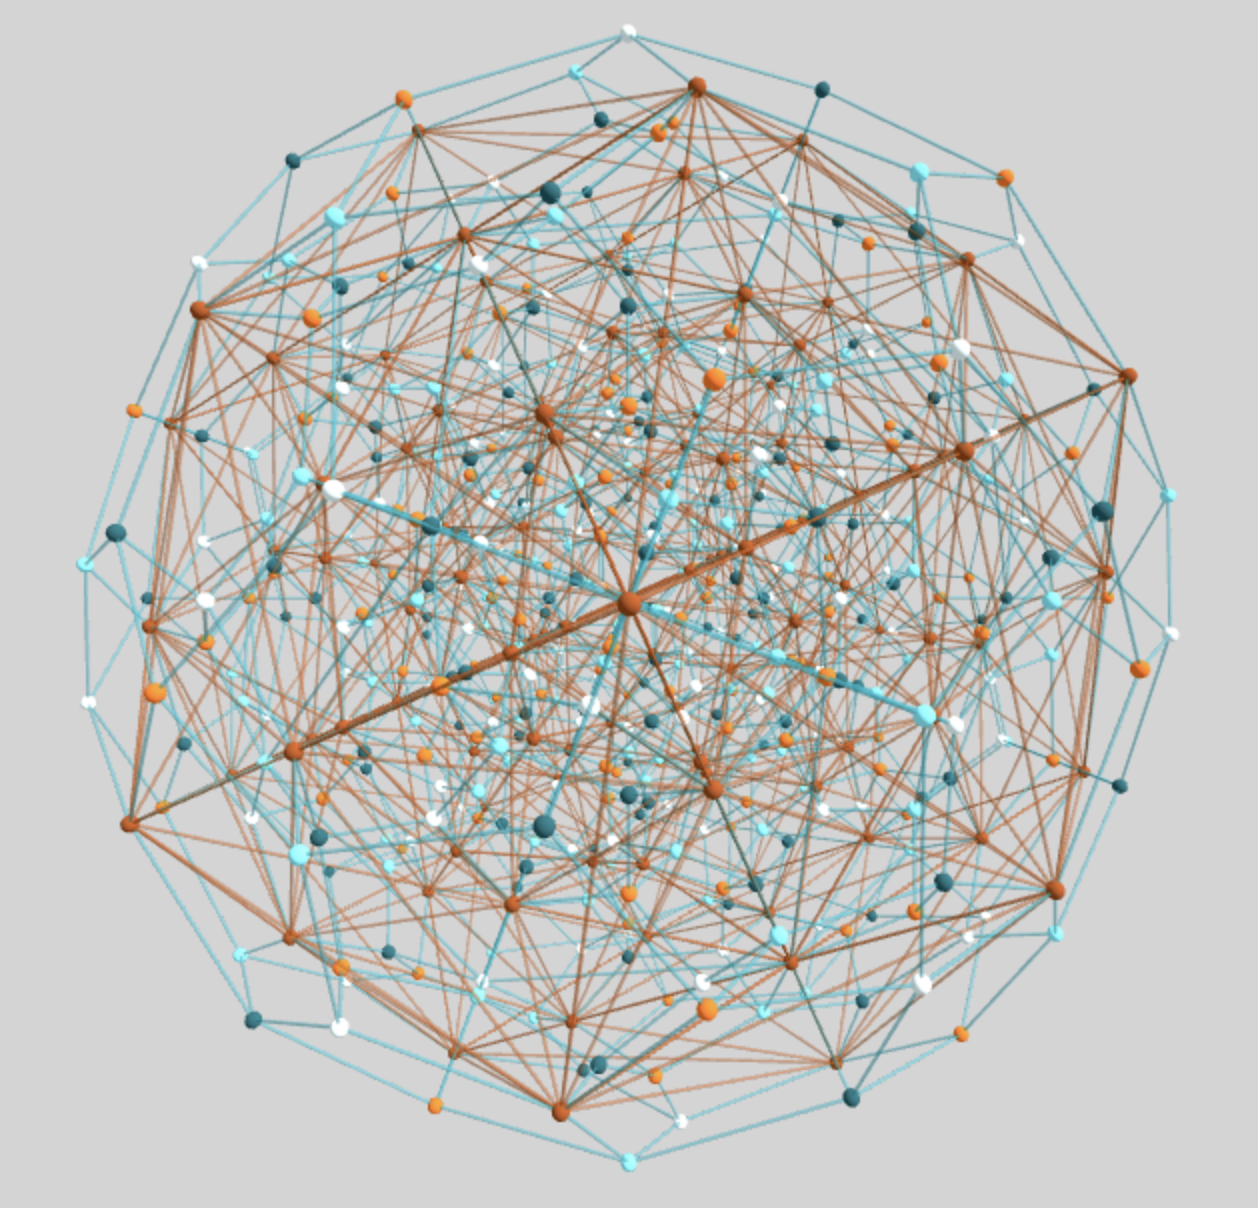 A 3D projection of the 120-cell with its vertices coloured and an inscribed 600-cell